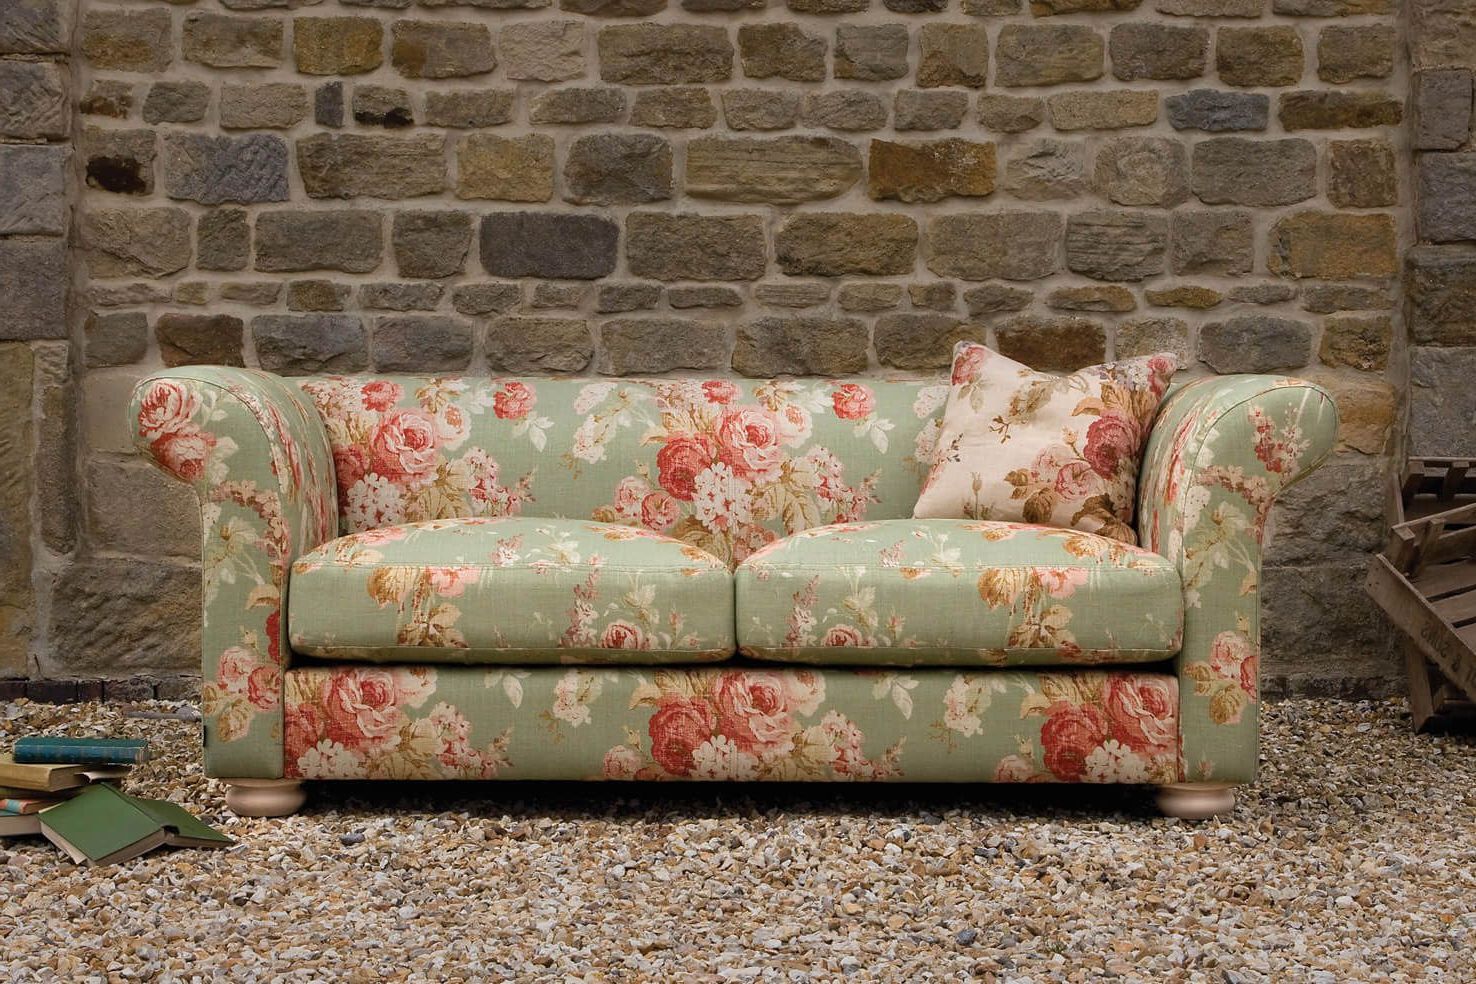 The Grandad Mulberry Sofa, Handcraftedindigo Furniture | Floral Intended For Sofas In Pattern (View 17 of 20)